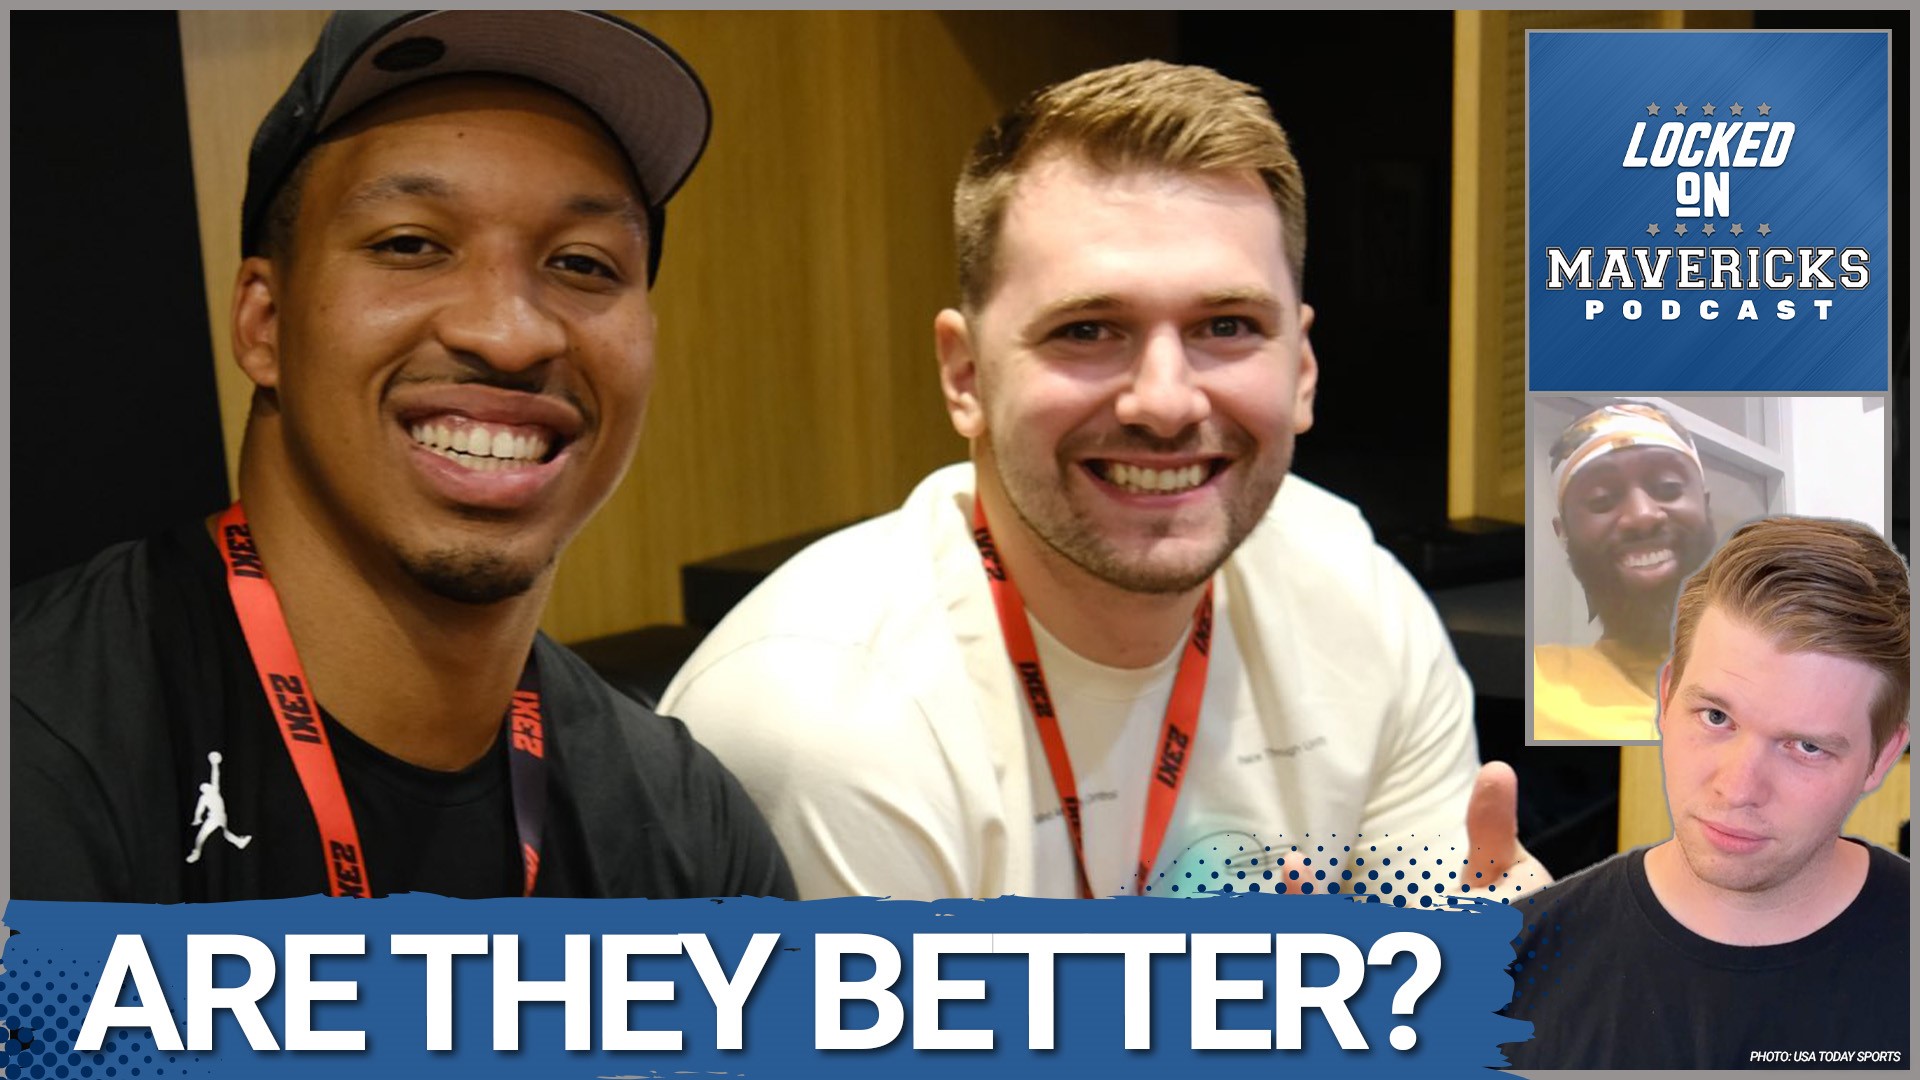 Nick Angstadt is joined by Reggie Adetula to discuss how Grant Williams & others will help the Dallas Mavericks get better around Luka Doncic & Kyrie Irving.